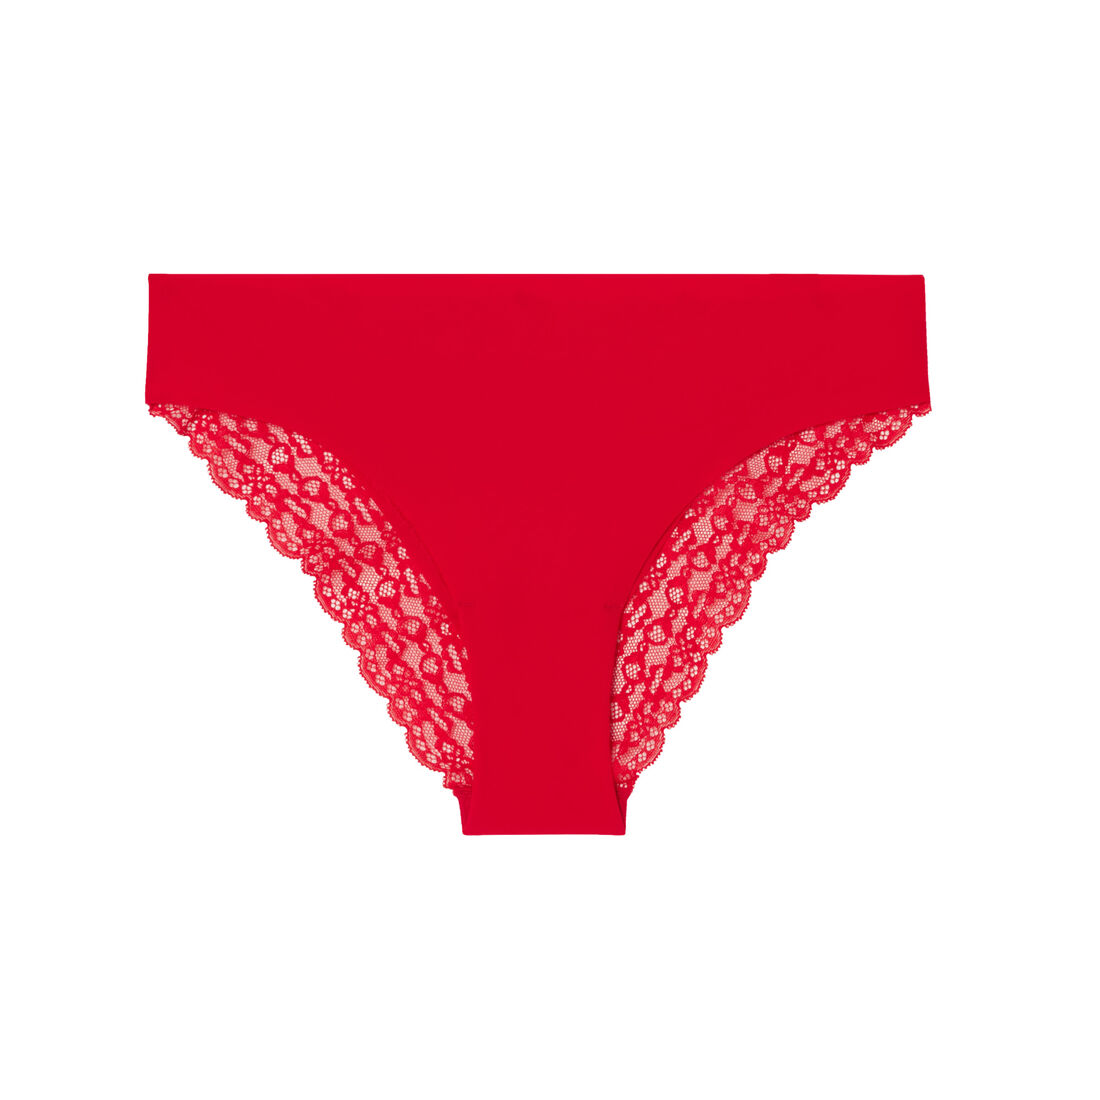 microfibre and lace briefs - red;